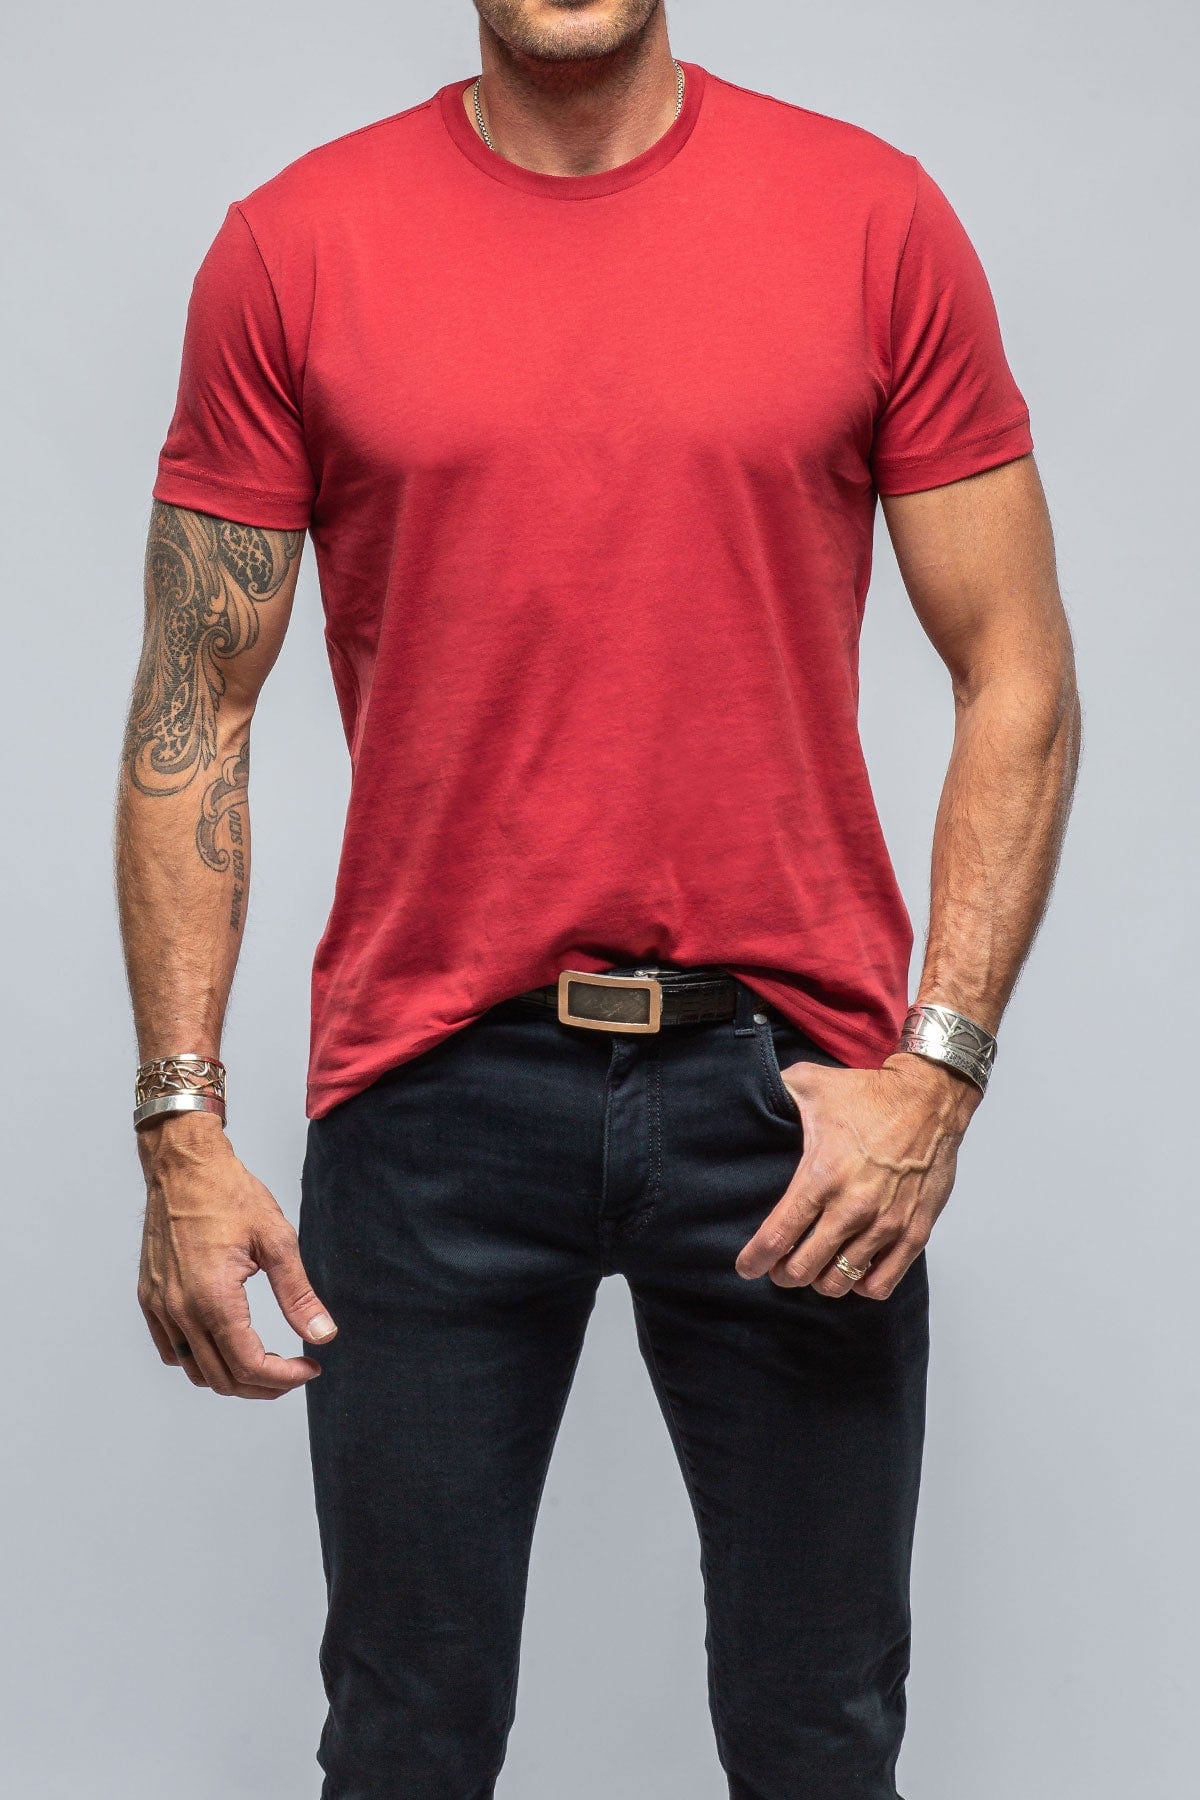 Pismo Cotton Tee In Red - AXEL'S